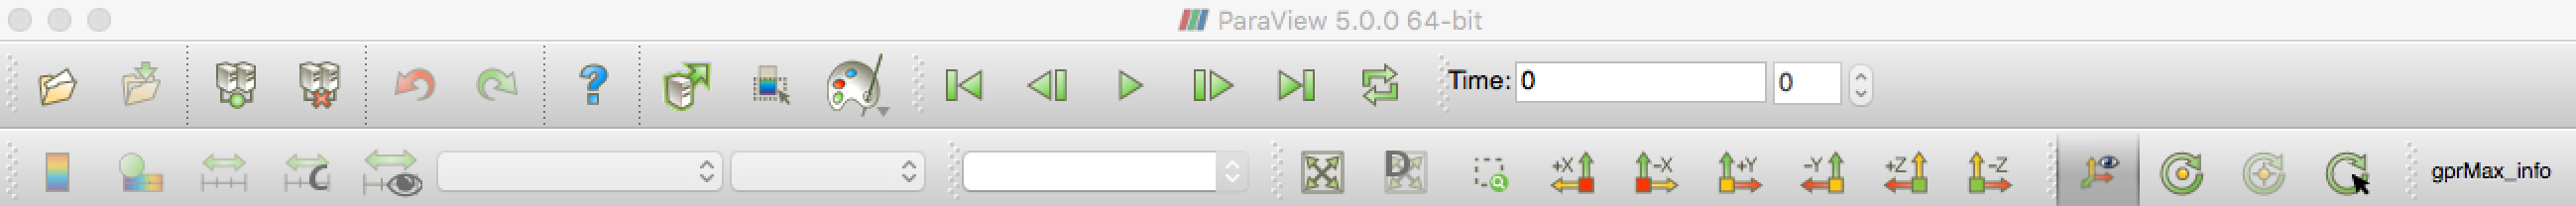 _images/paraview_toolbar.png